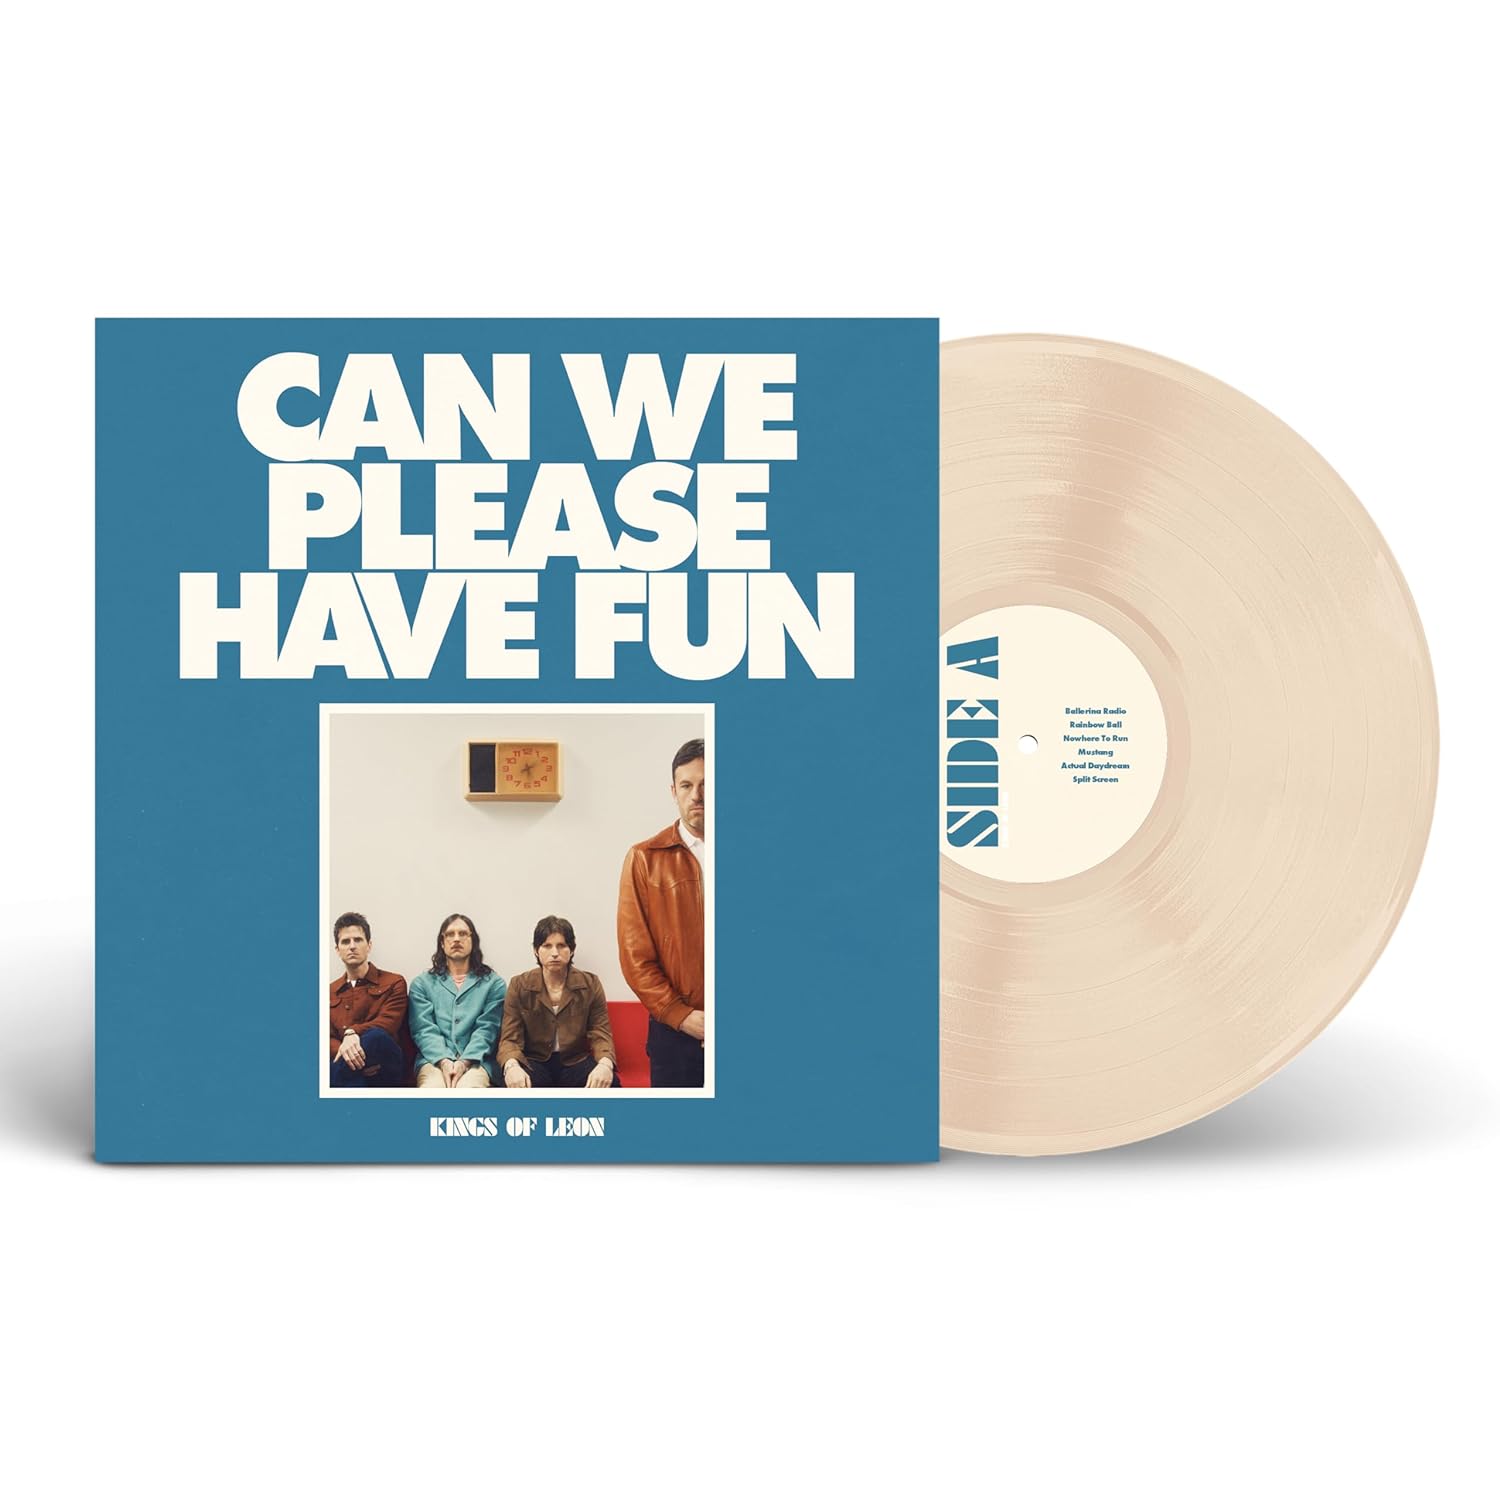 KINGS OF LEON – CAN WE PLEASE HAVE FUN LP